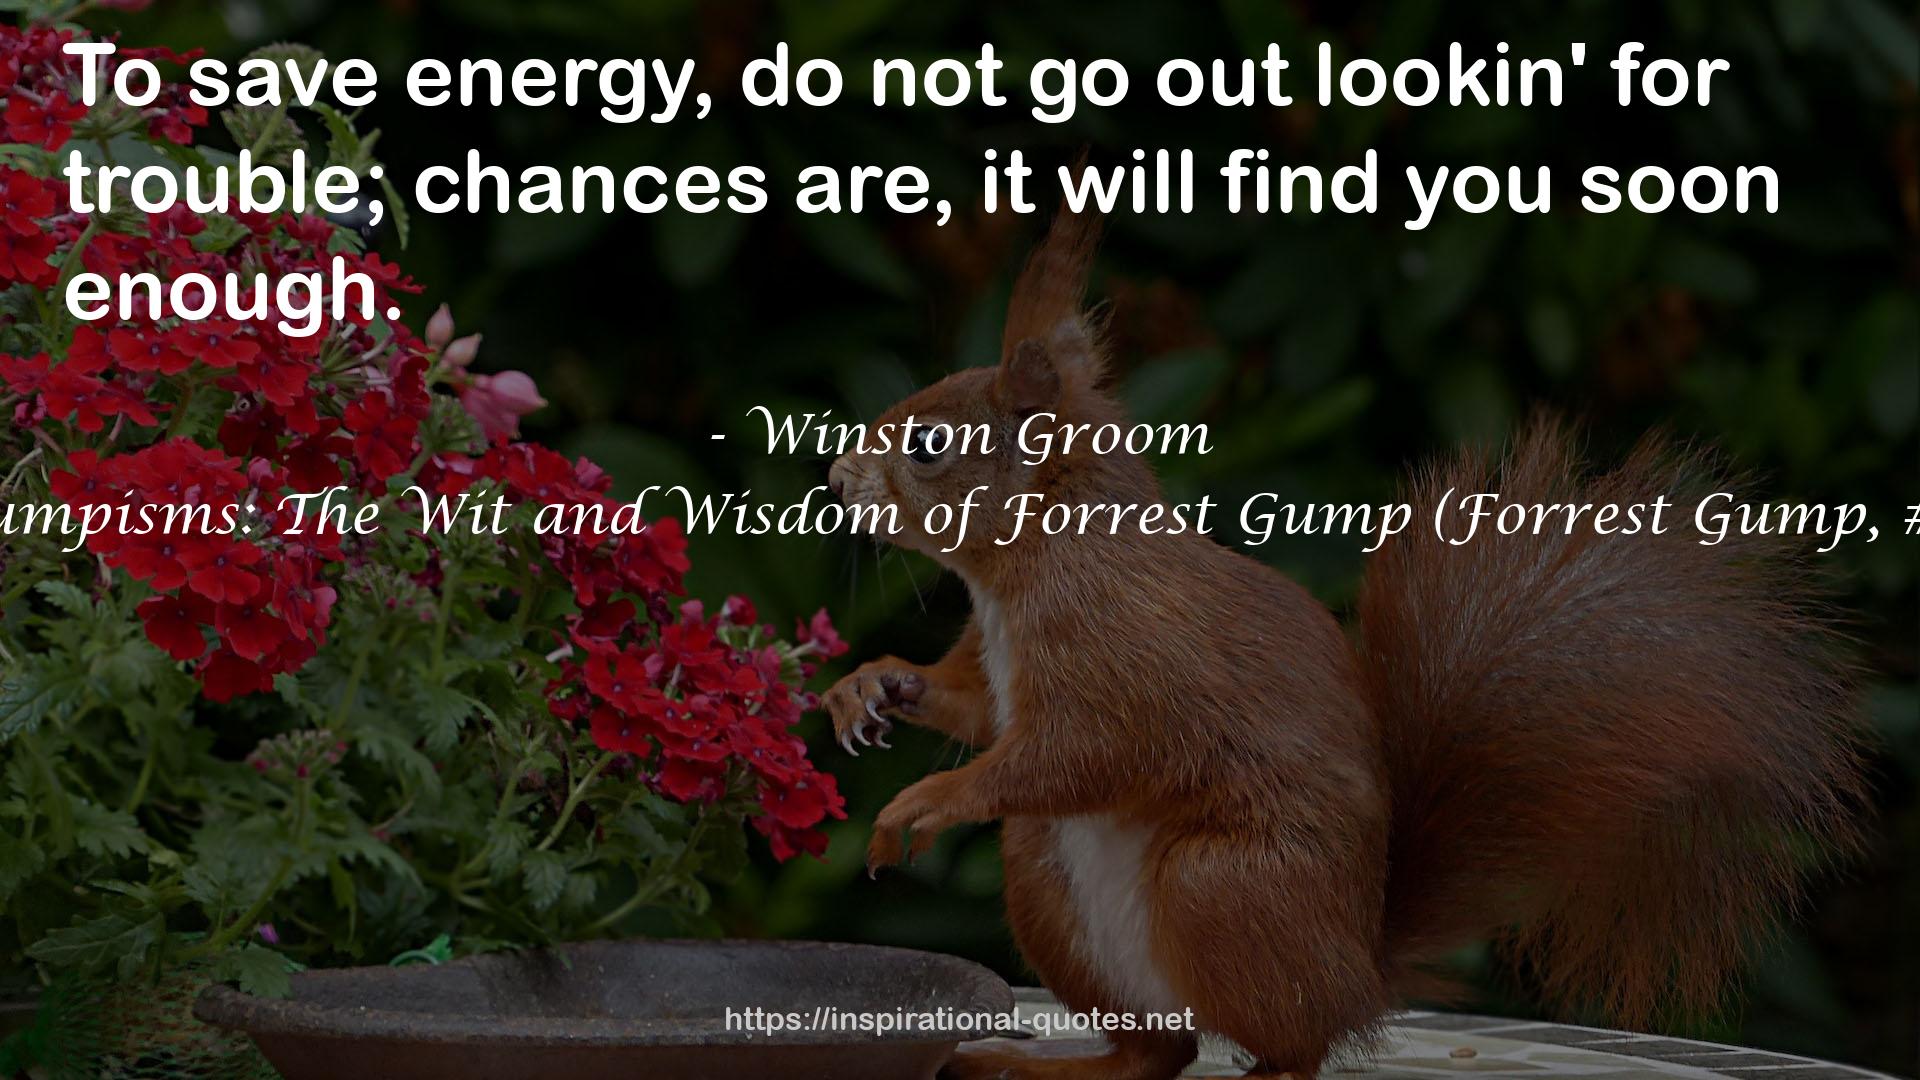 Gumpisms: The Wit and Wisdom of Forrest Gump (Forrest Gump, #3) QUOTES